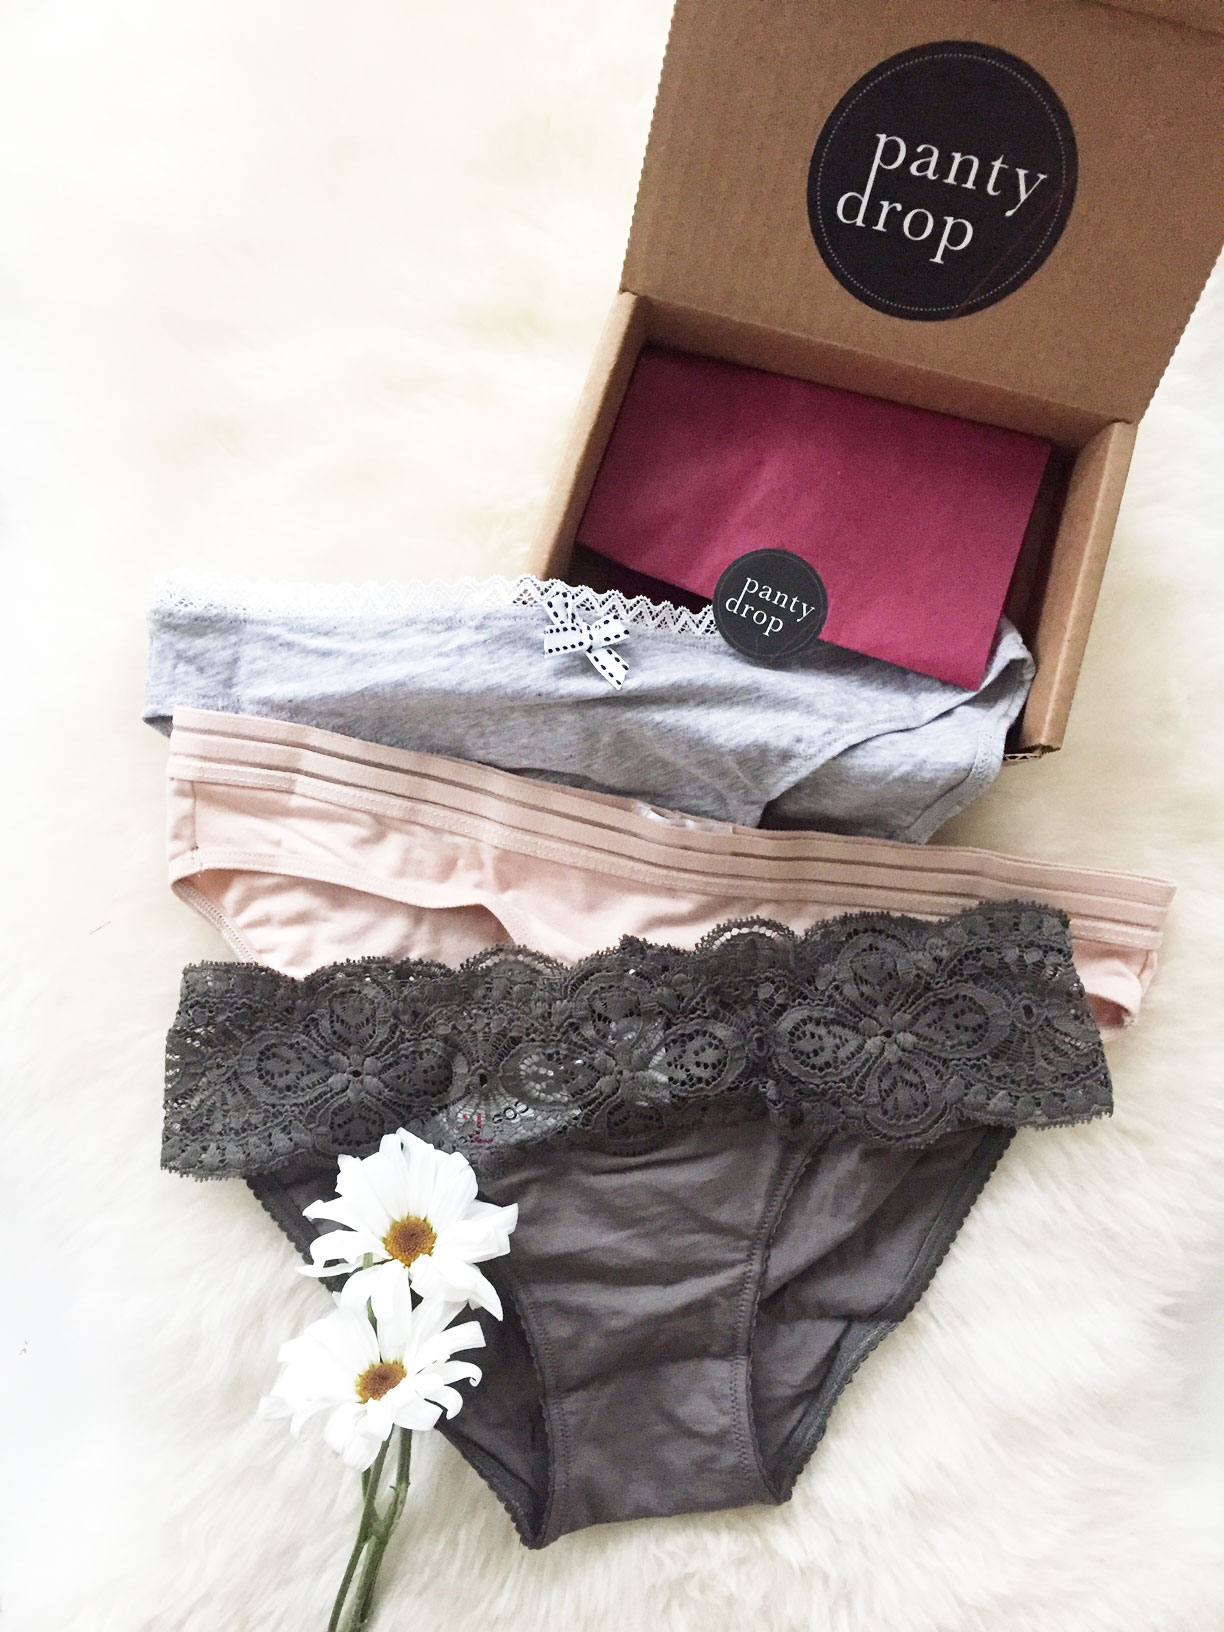 Get beautiful lingerie delivered to your doorstep with this subscription panty box service.